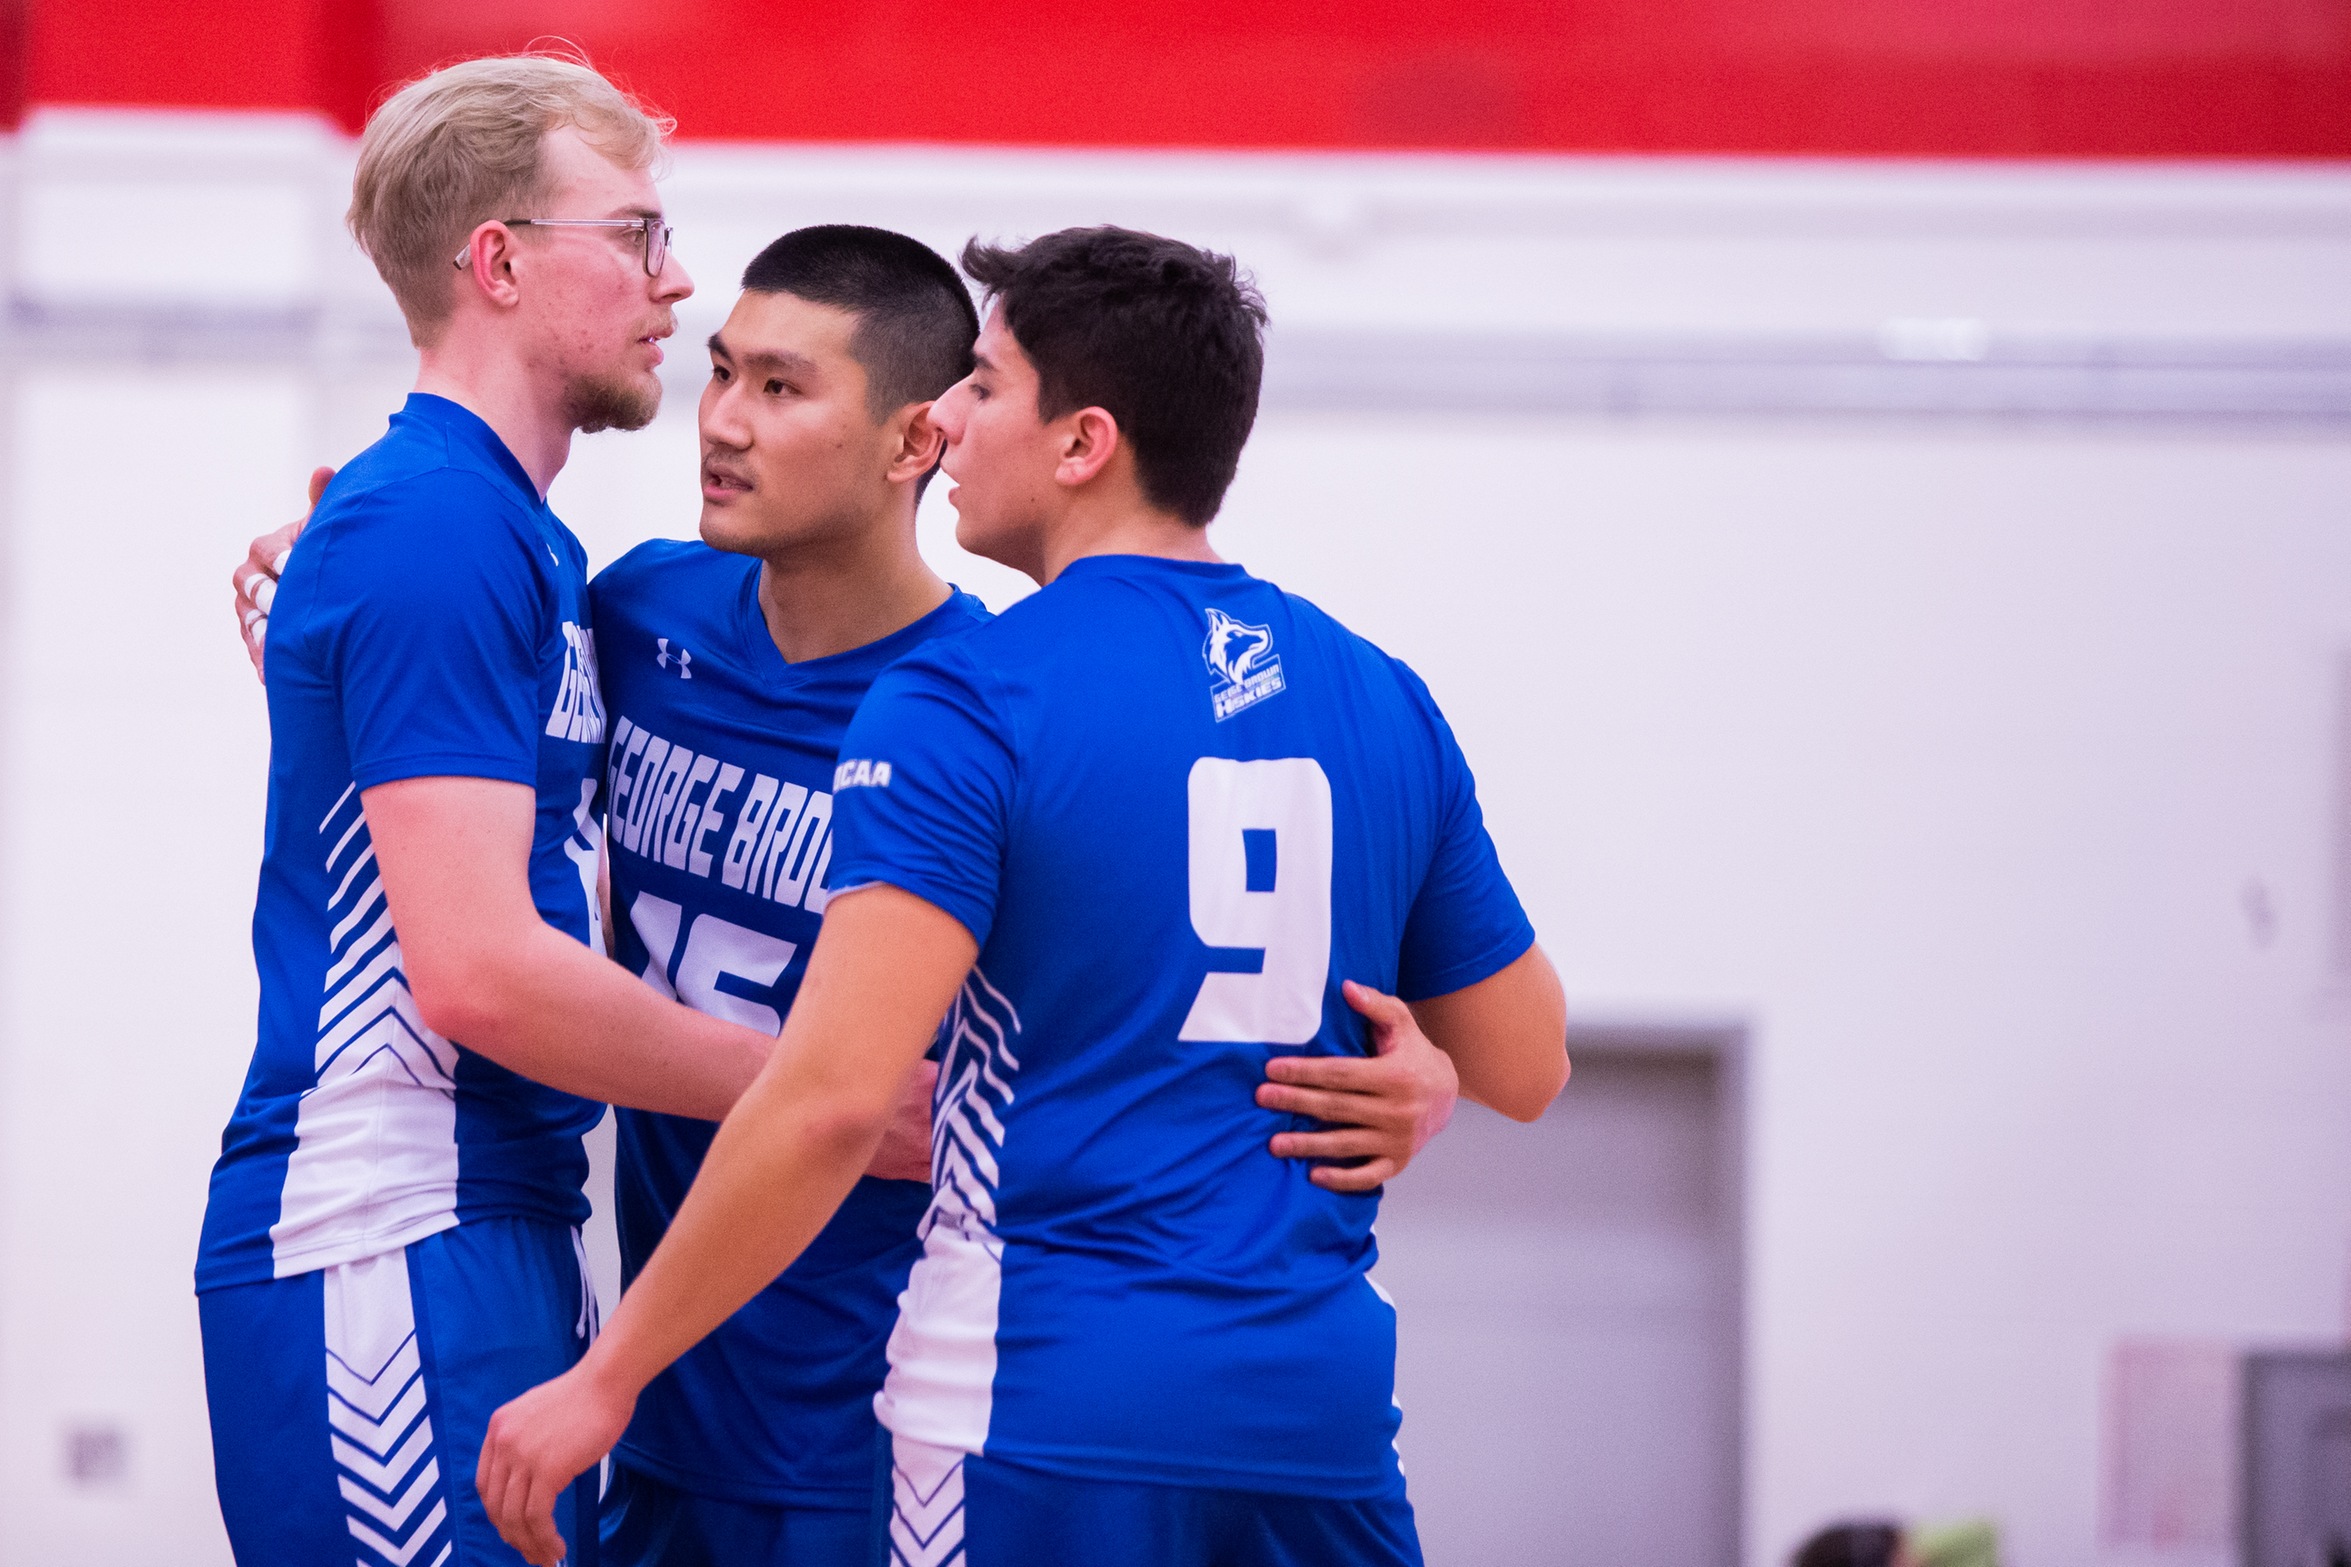 HUSKIES MEN’S VOLLEYBALL COME UP SHORT AGAINST THE PANTHERS